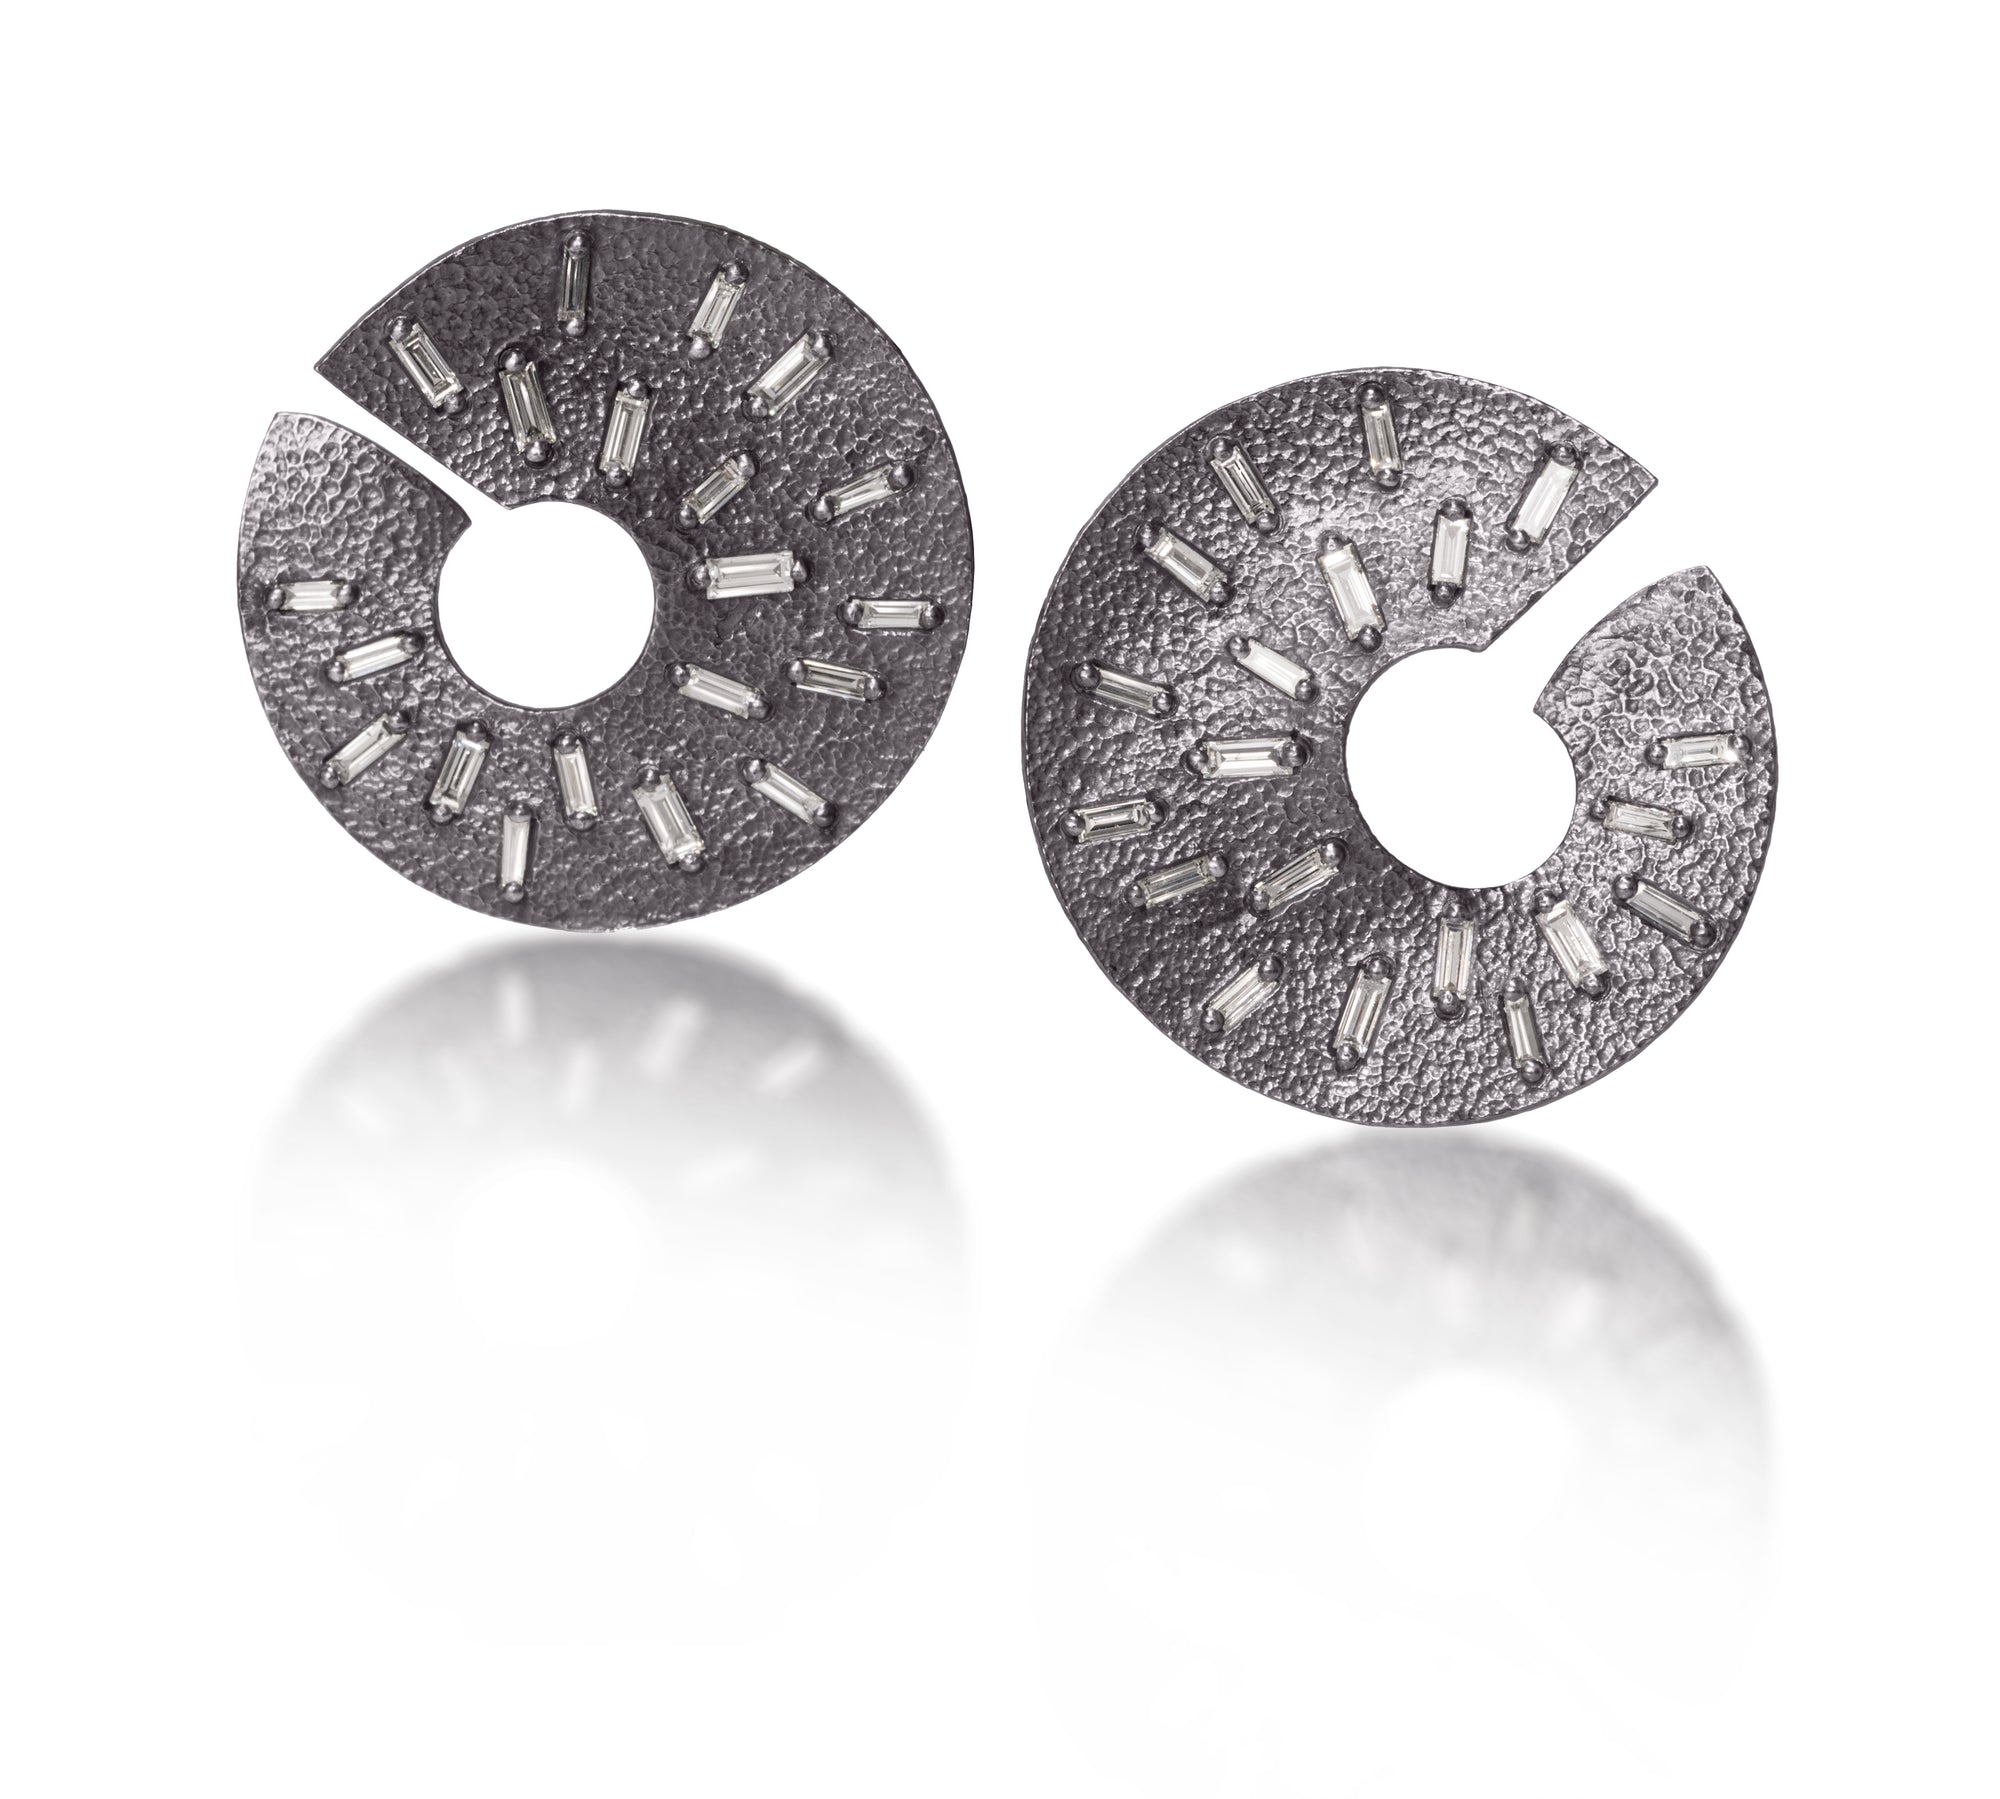 The larger of two radiant styled earrings, this one created in oxidized sterling, each set with 22 white diamond baguettes. Richly textured and designed three dimensionally to wrap around from the front to behind the ear. 1.316 tcw.